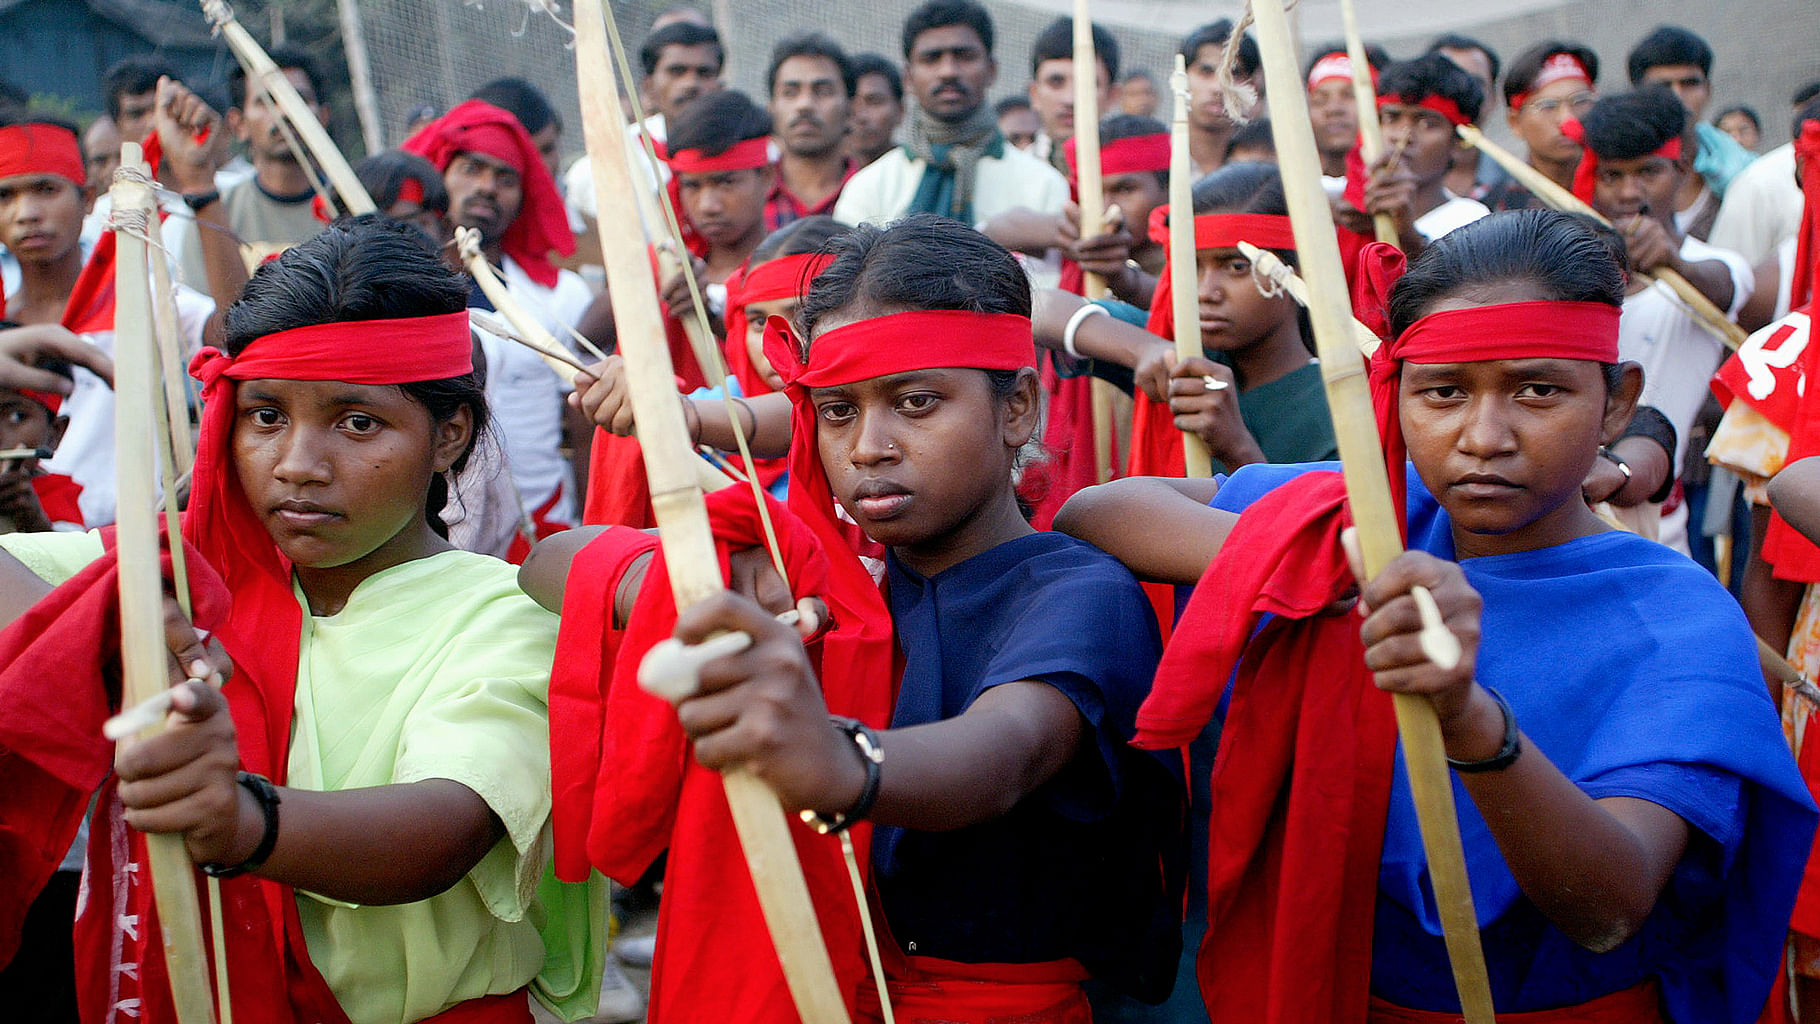  File picture of Naxalites posing with bows and arrows during a rally. (Images used for representational purposes only)